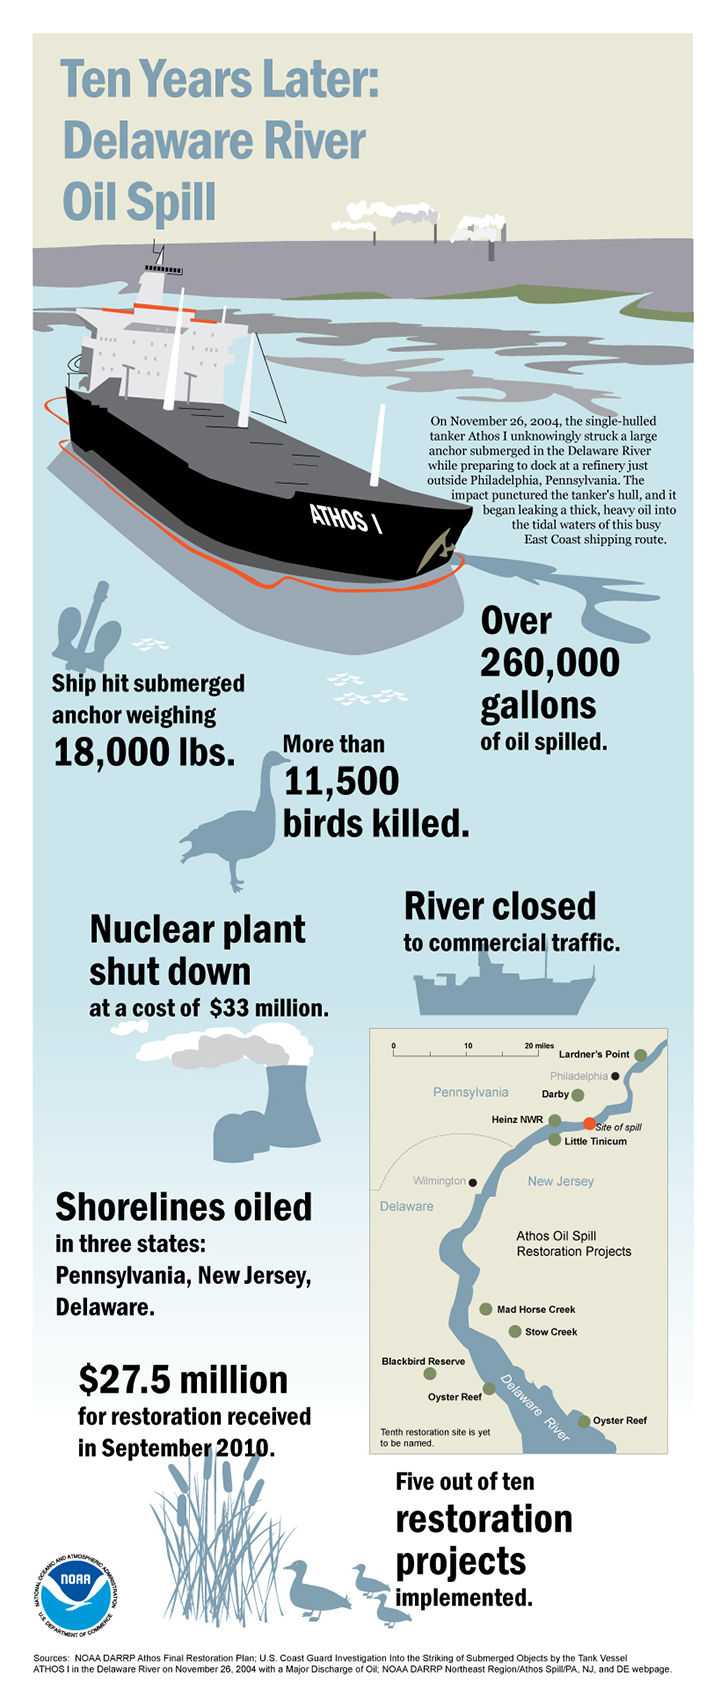 Infographic of Athos I oil spill with ship, facts about the spill's impacts, and map of restoration projects. Ship hit submerged anchor weighting 18,000 pounds. More than 11,500 birds killed. River closed to commercial traffic. Nuclear plant shut down at cost of $33 million. Shorelines oiled in three states. $27.5 million received for restoration in September 2010. Five out of 10 restoration projects implemented.